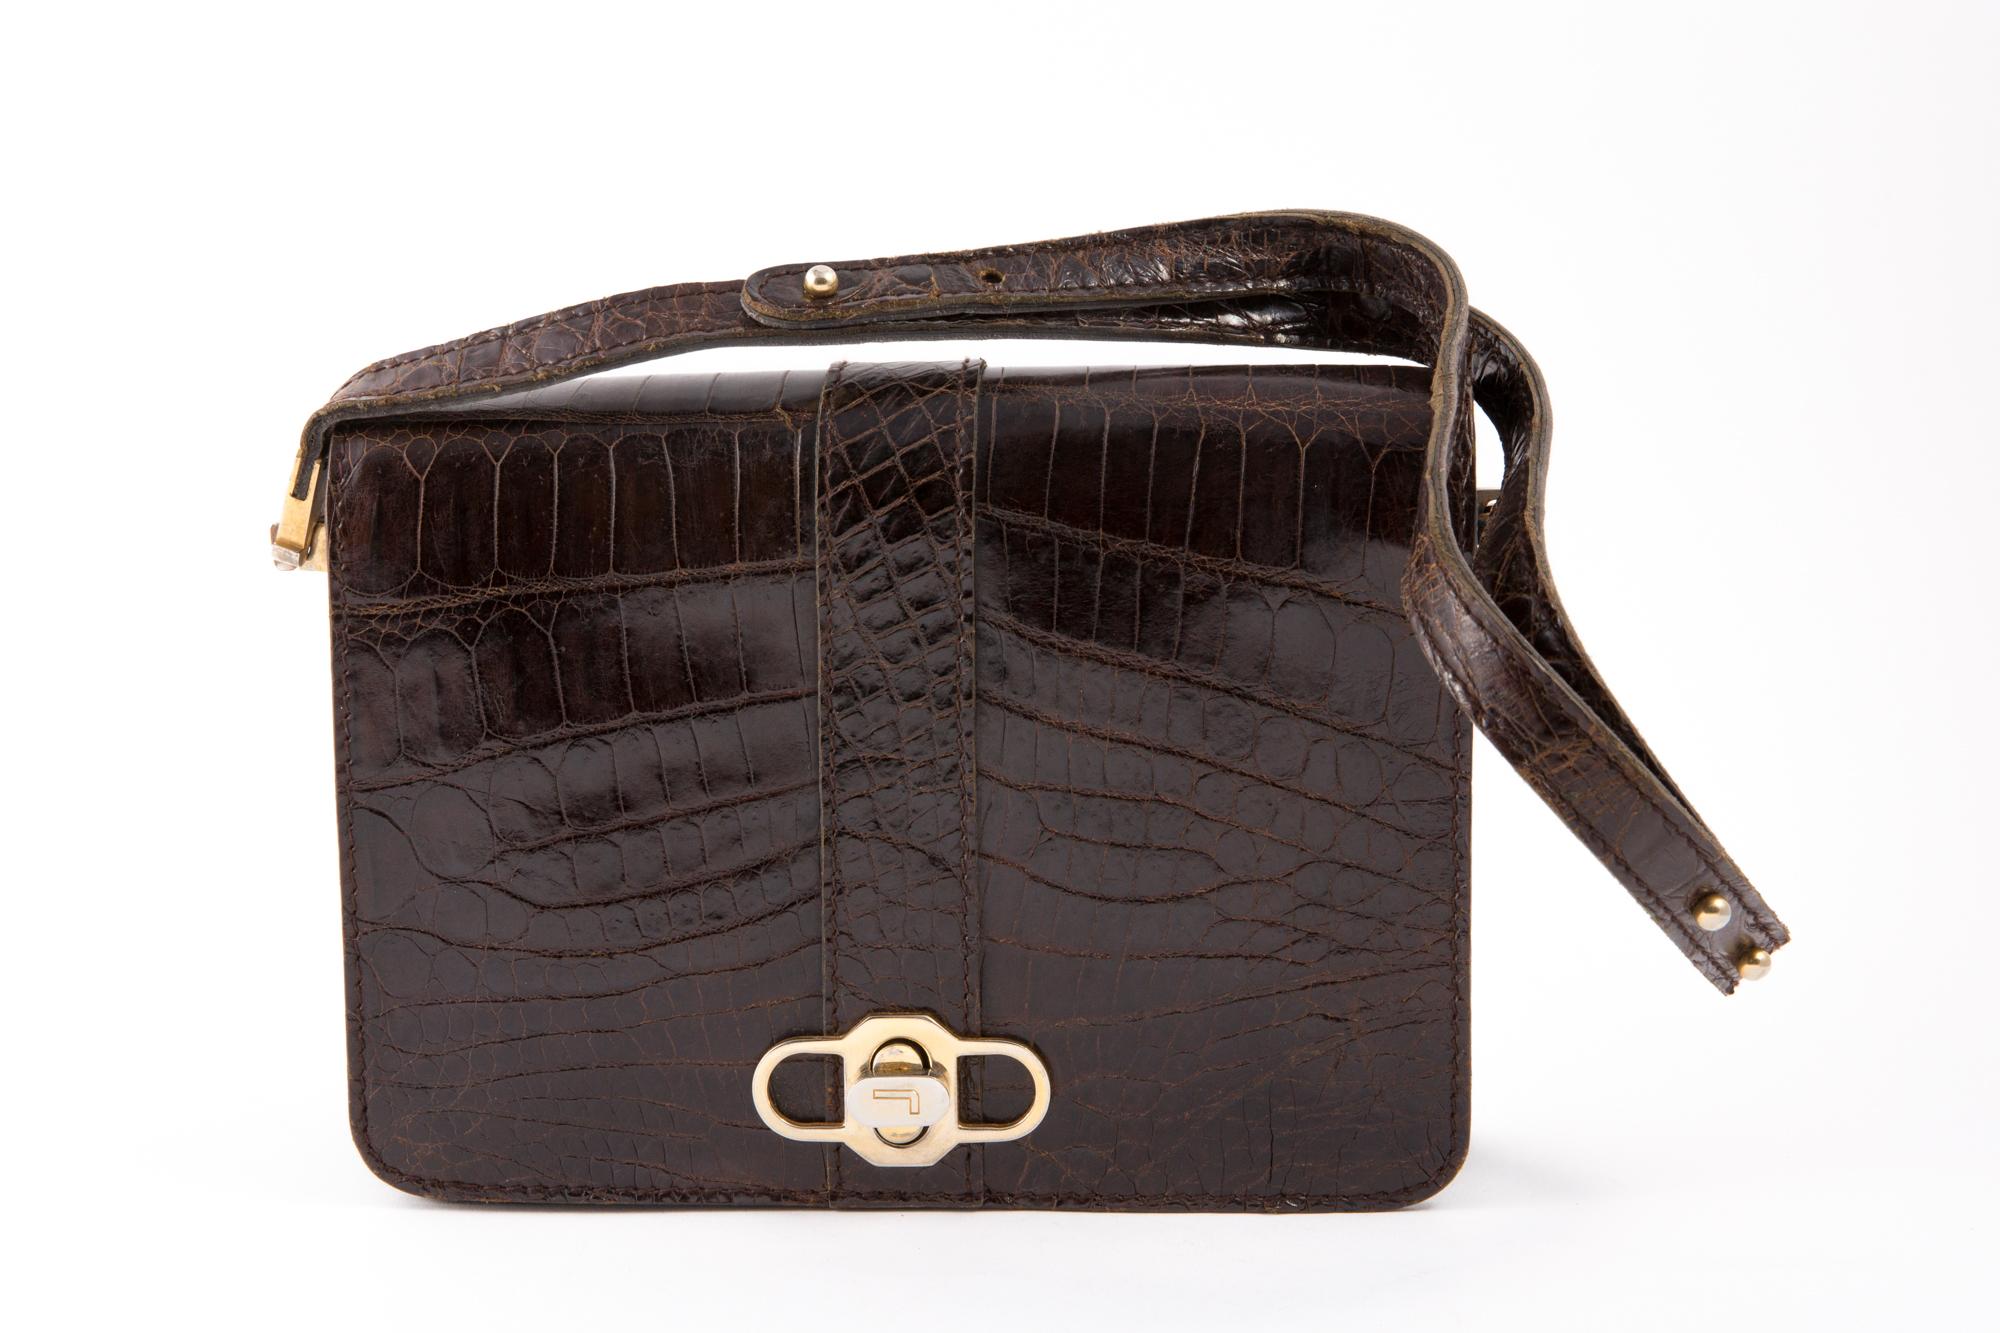 1970s brown leather hand bag featuring an adjustable hand strap, a front gold tone claps opening, inside compartments.
Length at Bottom 8.6in. (22 cm)
Height: 6.2in. (16 cm)
Width:2.7in (7cm)
In good vintage condition.  Made in France.
Please note